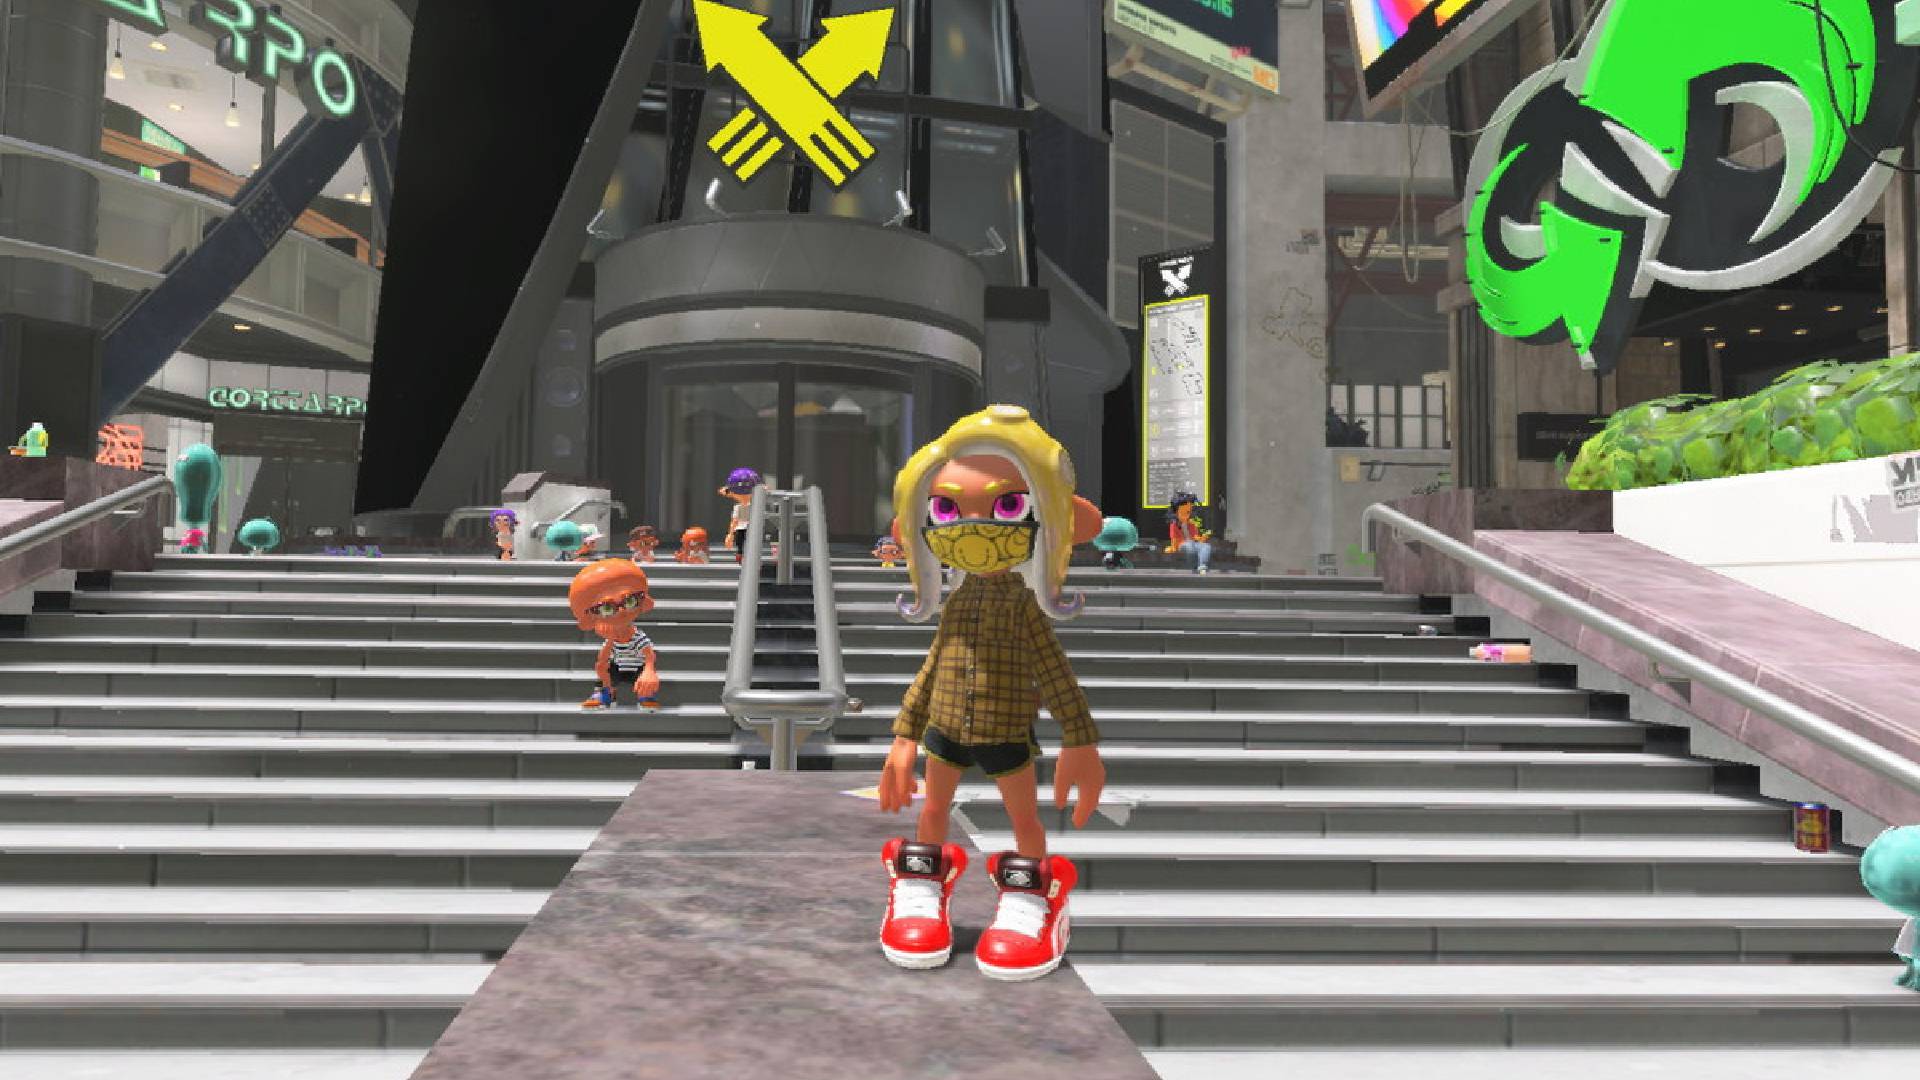 Splatoon 3 tableturf battle: a screenshot from Splatoon 3 shows an Inkling stood on the steps of the plaza